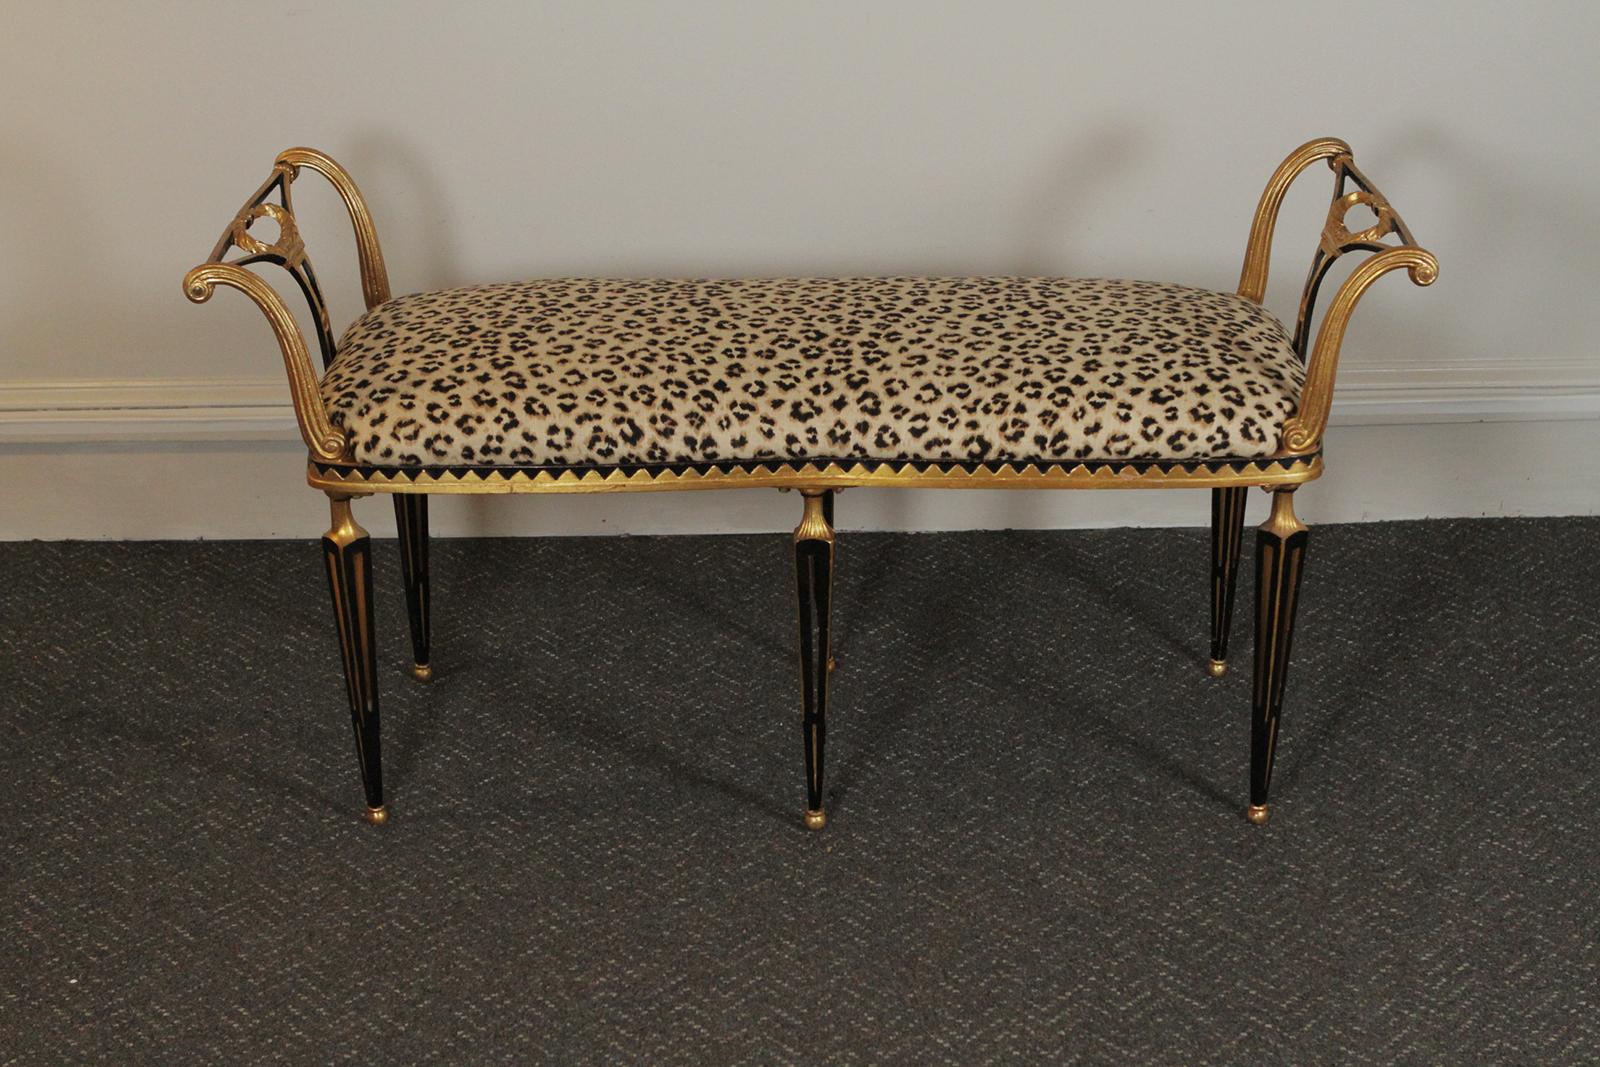 Italian gilt and painted Florentine style iron bench by Palladio with new leopard fabric
Dimensions: 48” W x 18” D x 25” H x 20” seat.